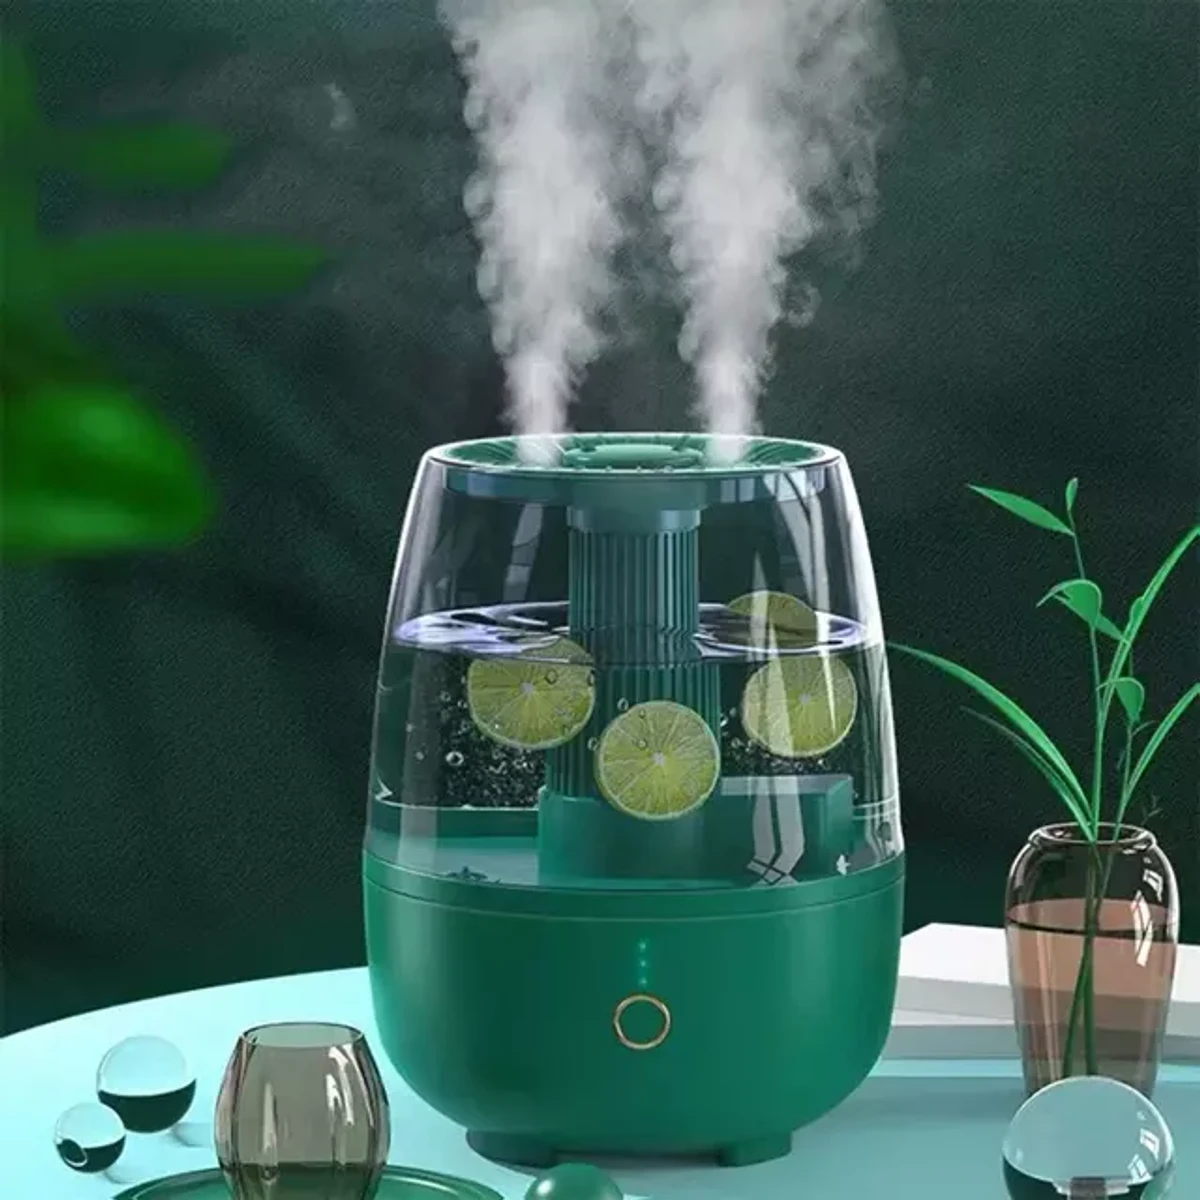 TWO Port Spray Humidifier 6.8L